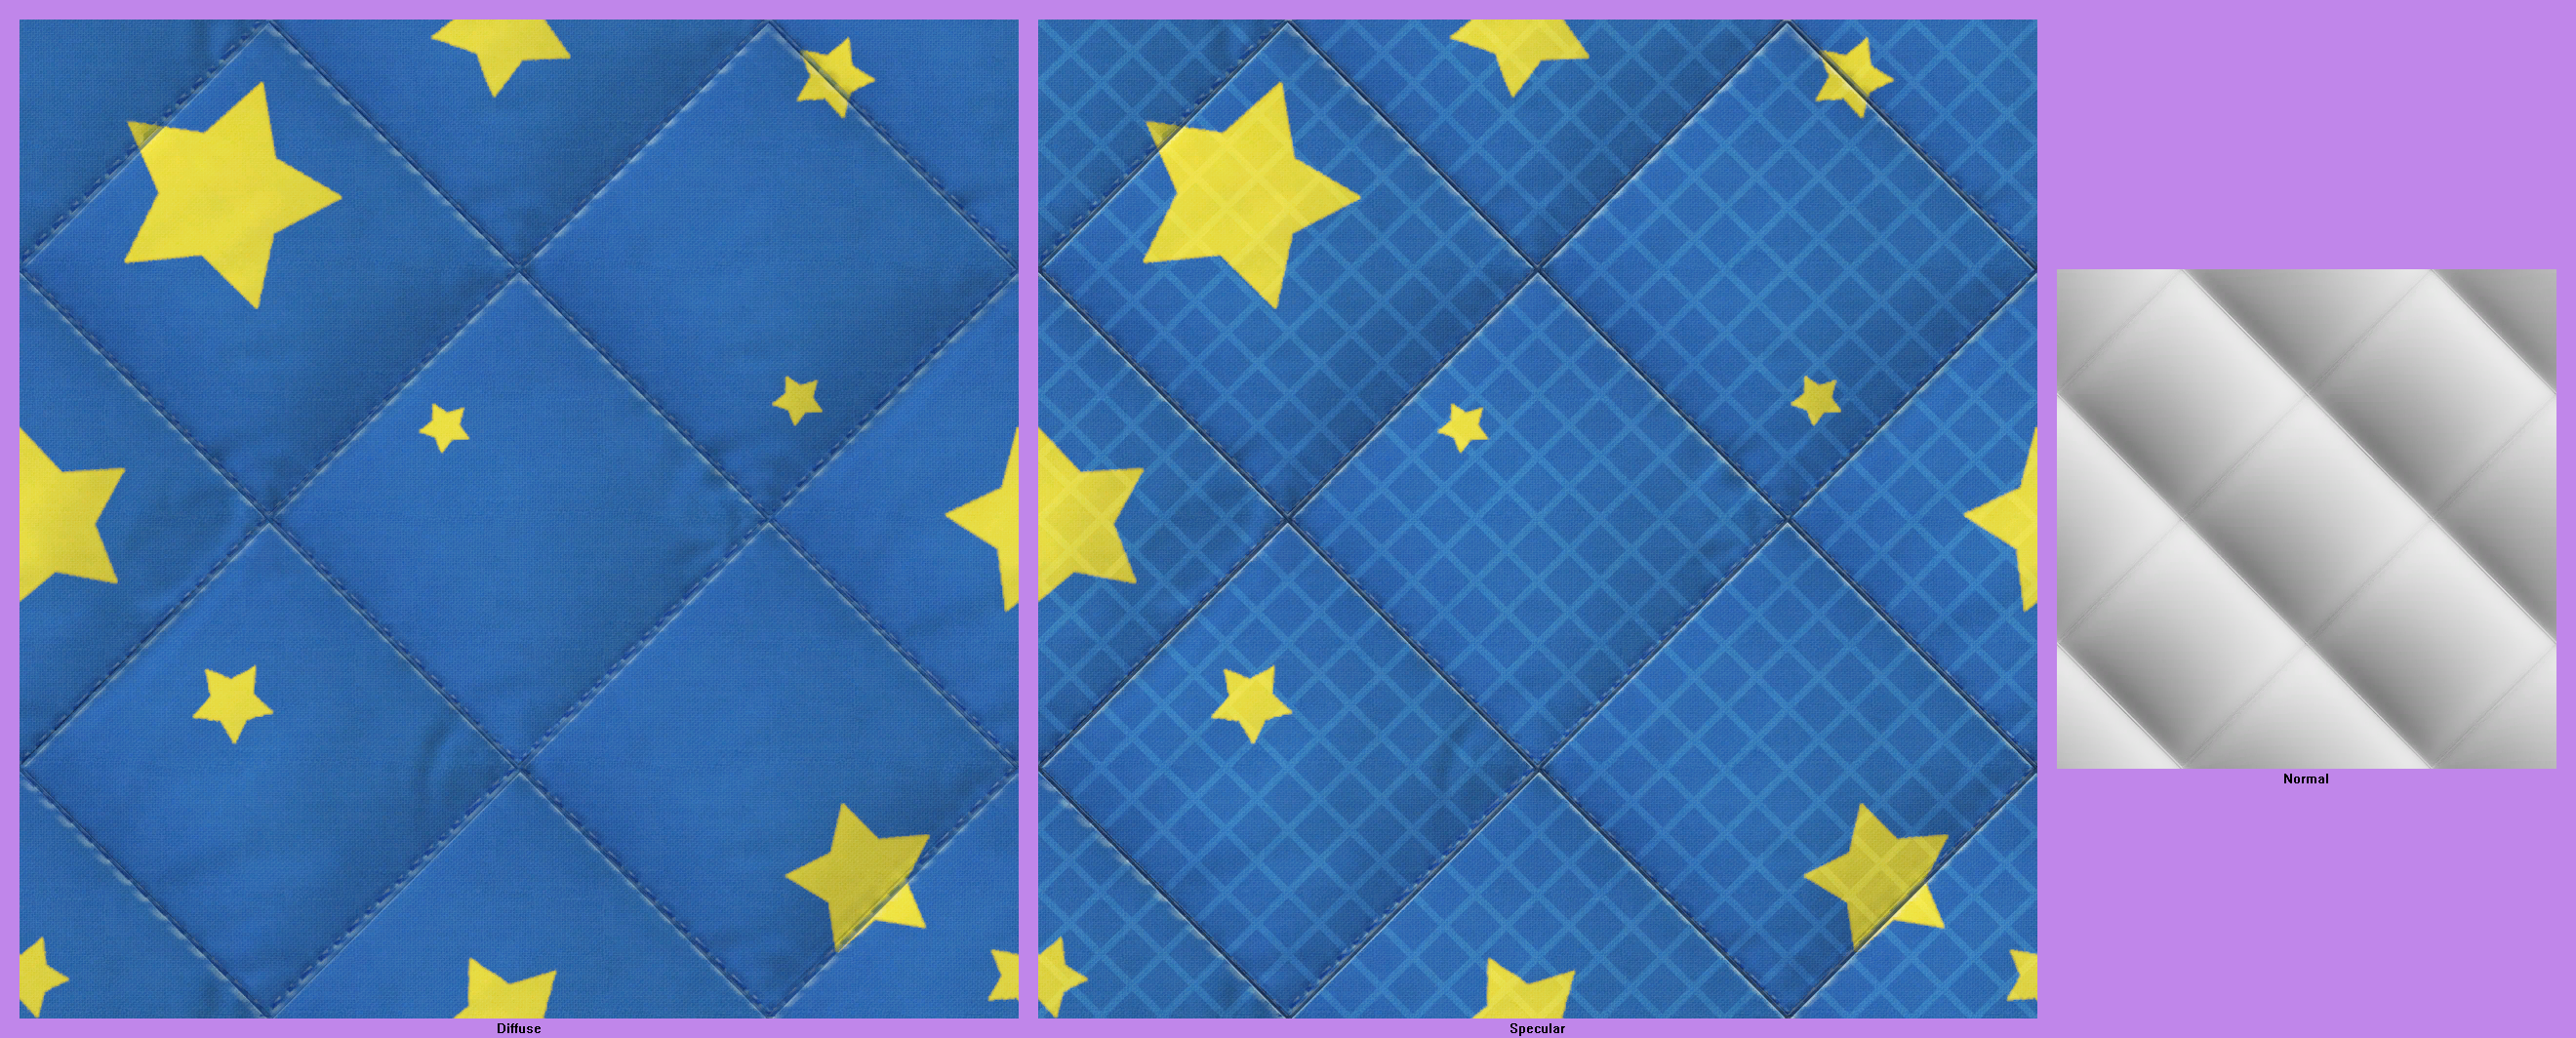 LittleBigPlanet 2 - Starry Quilted